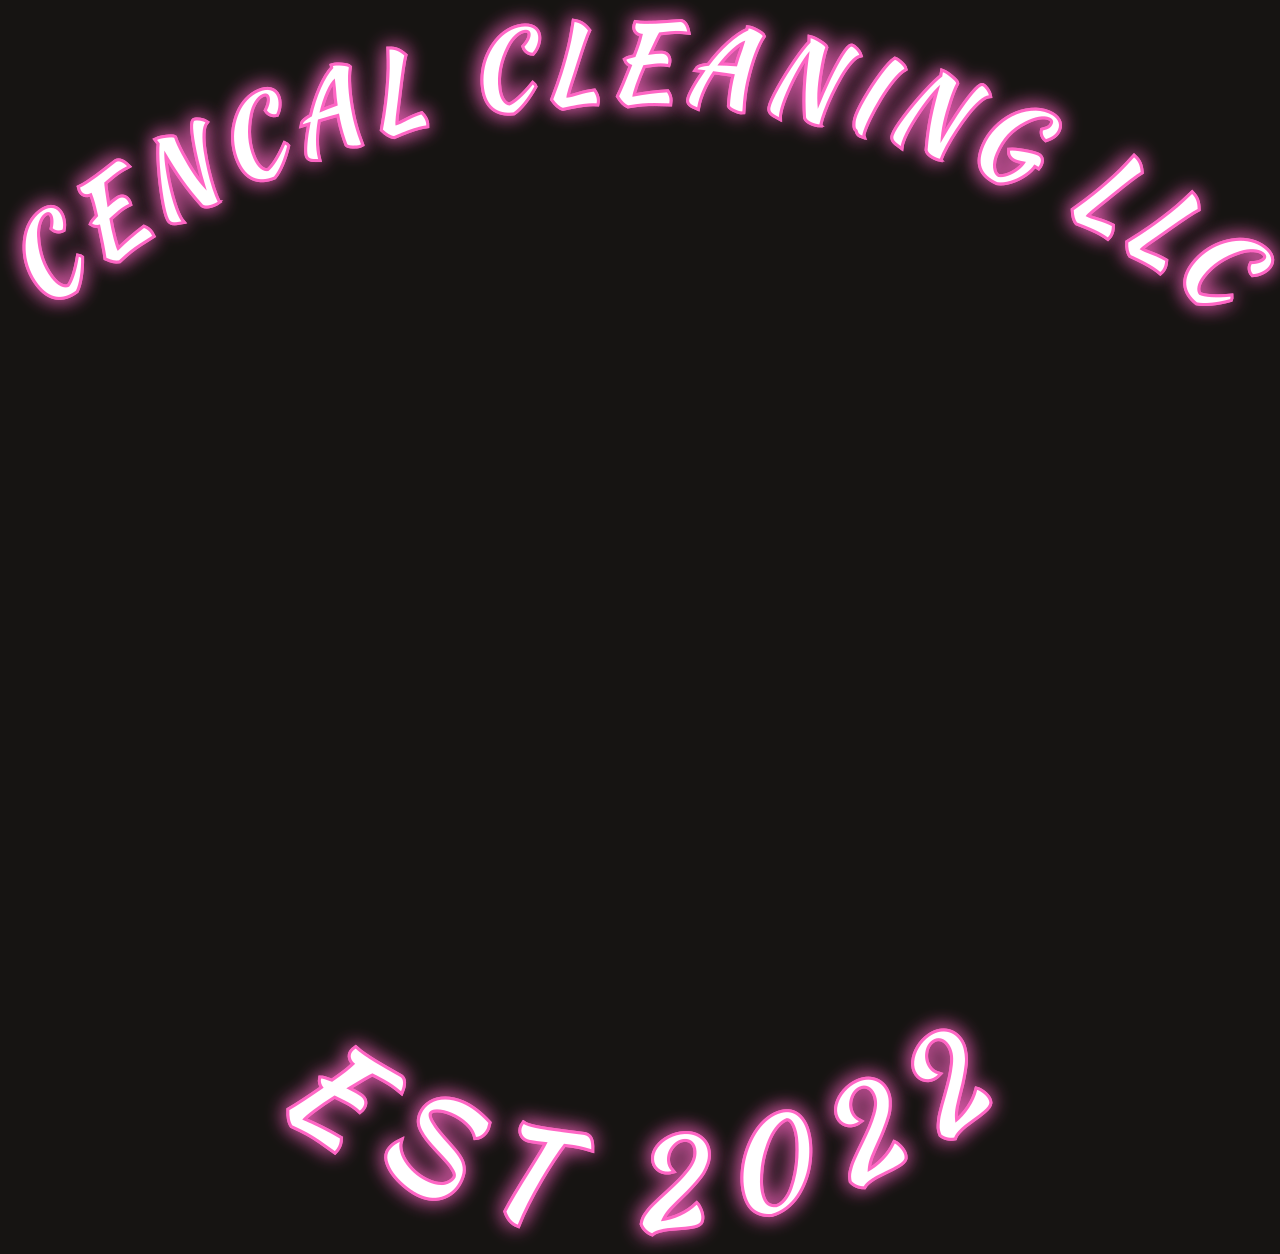 CENCAL CLEANING LLC's web page